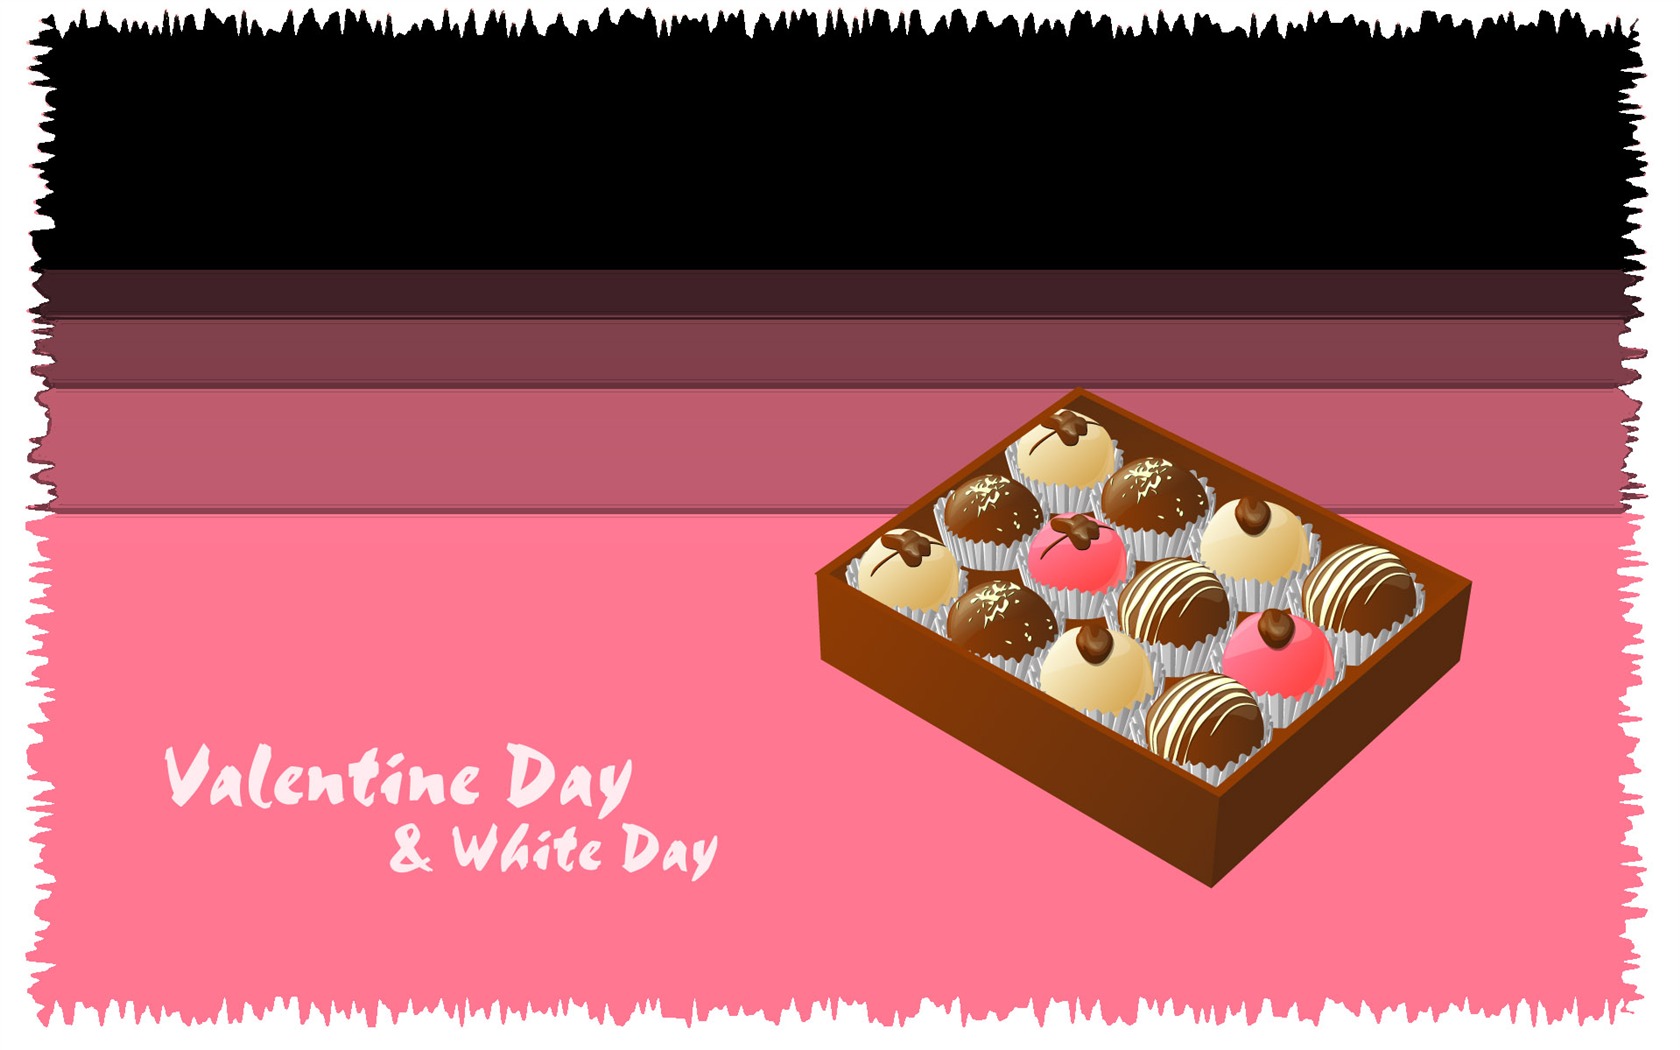 Valentine's Day Theme Wallpapers (1) #9 - 1680x1050